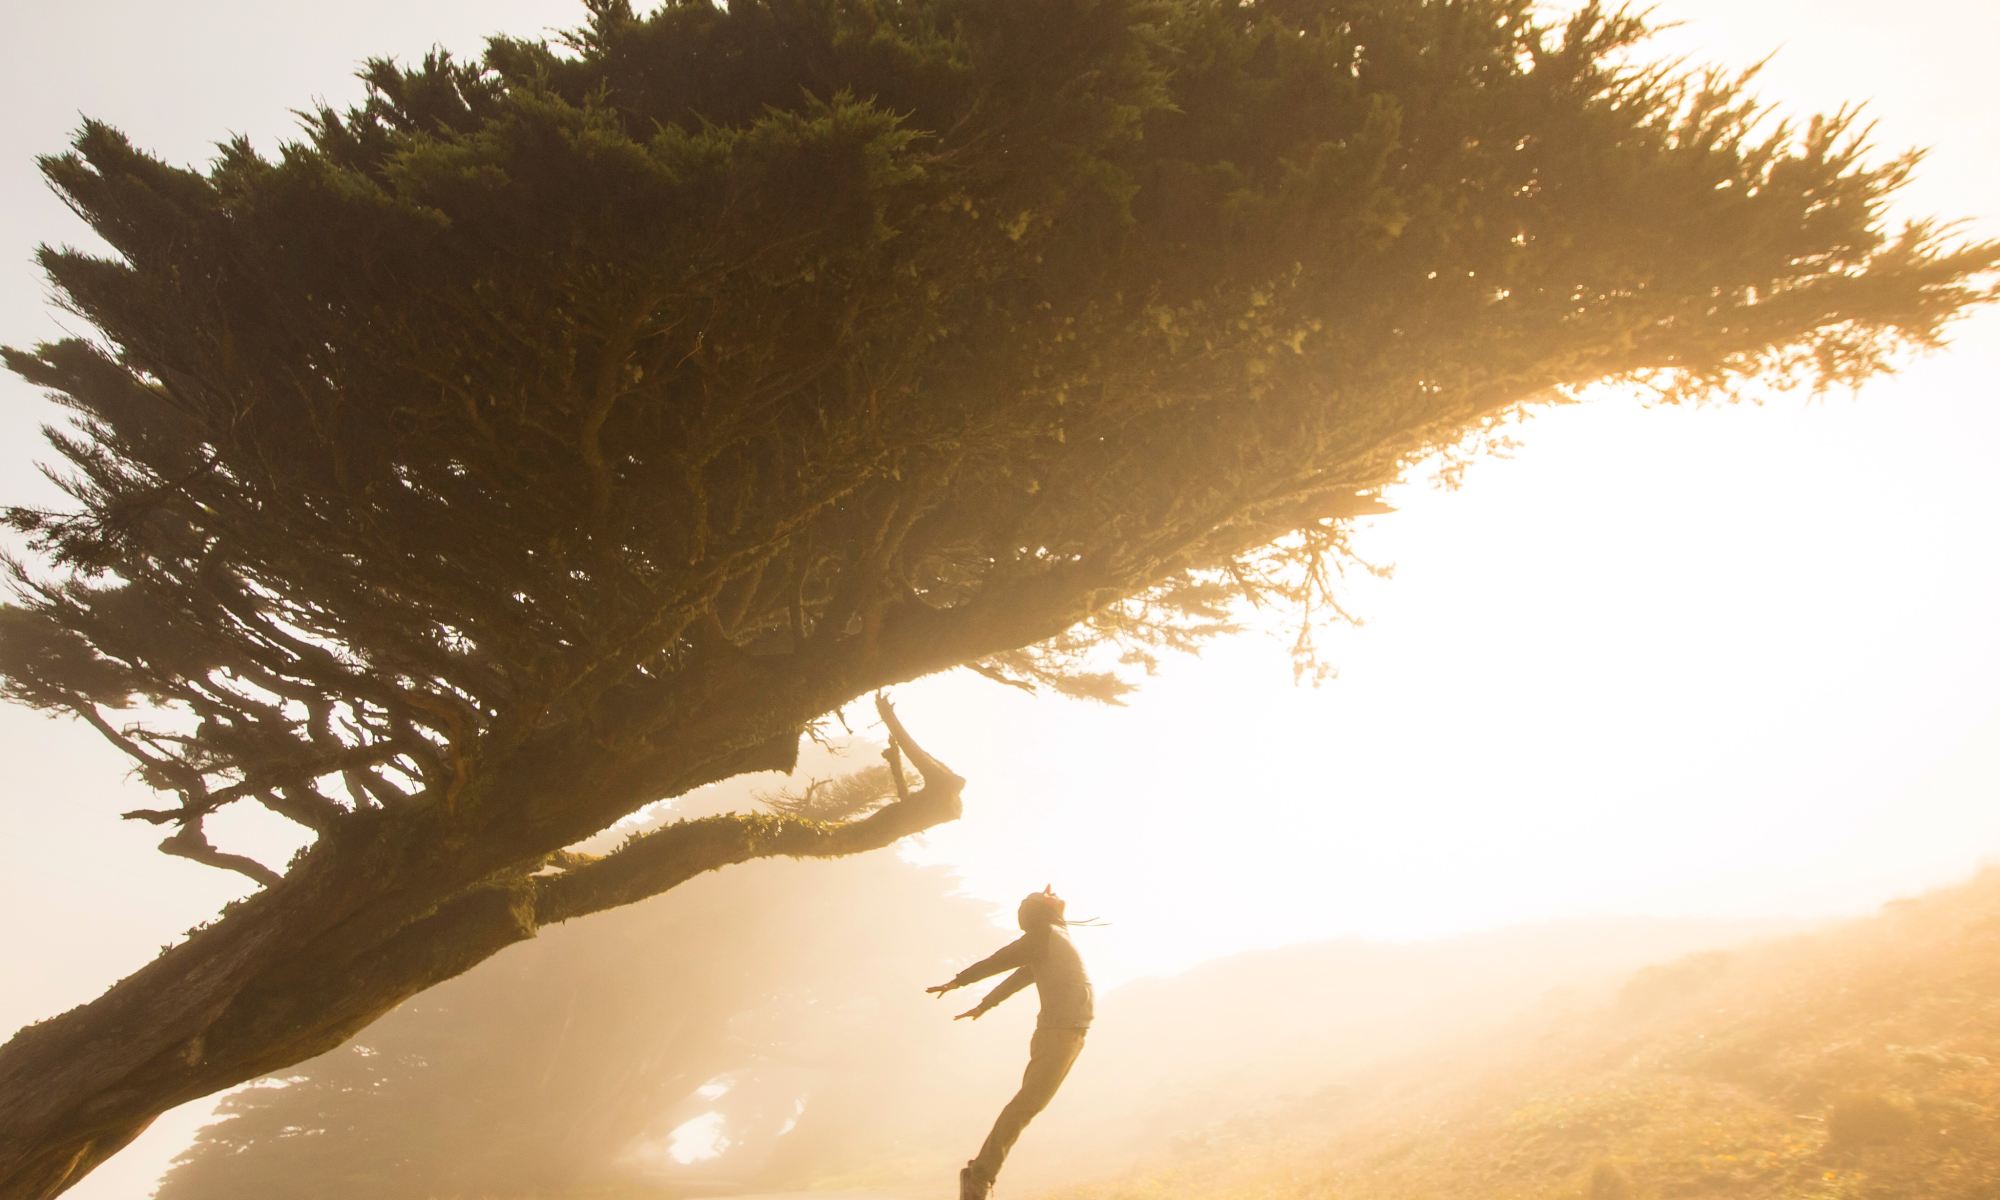 Silhouette of motivated and excited person jumping under tree